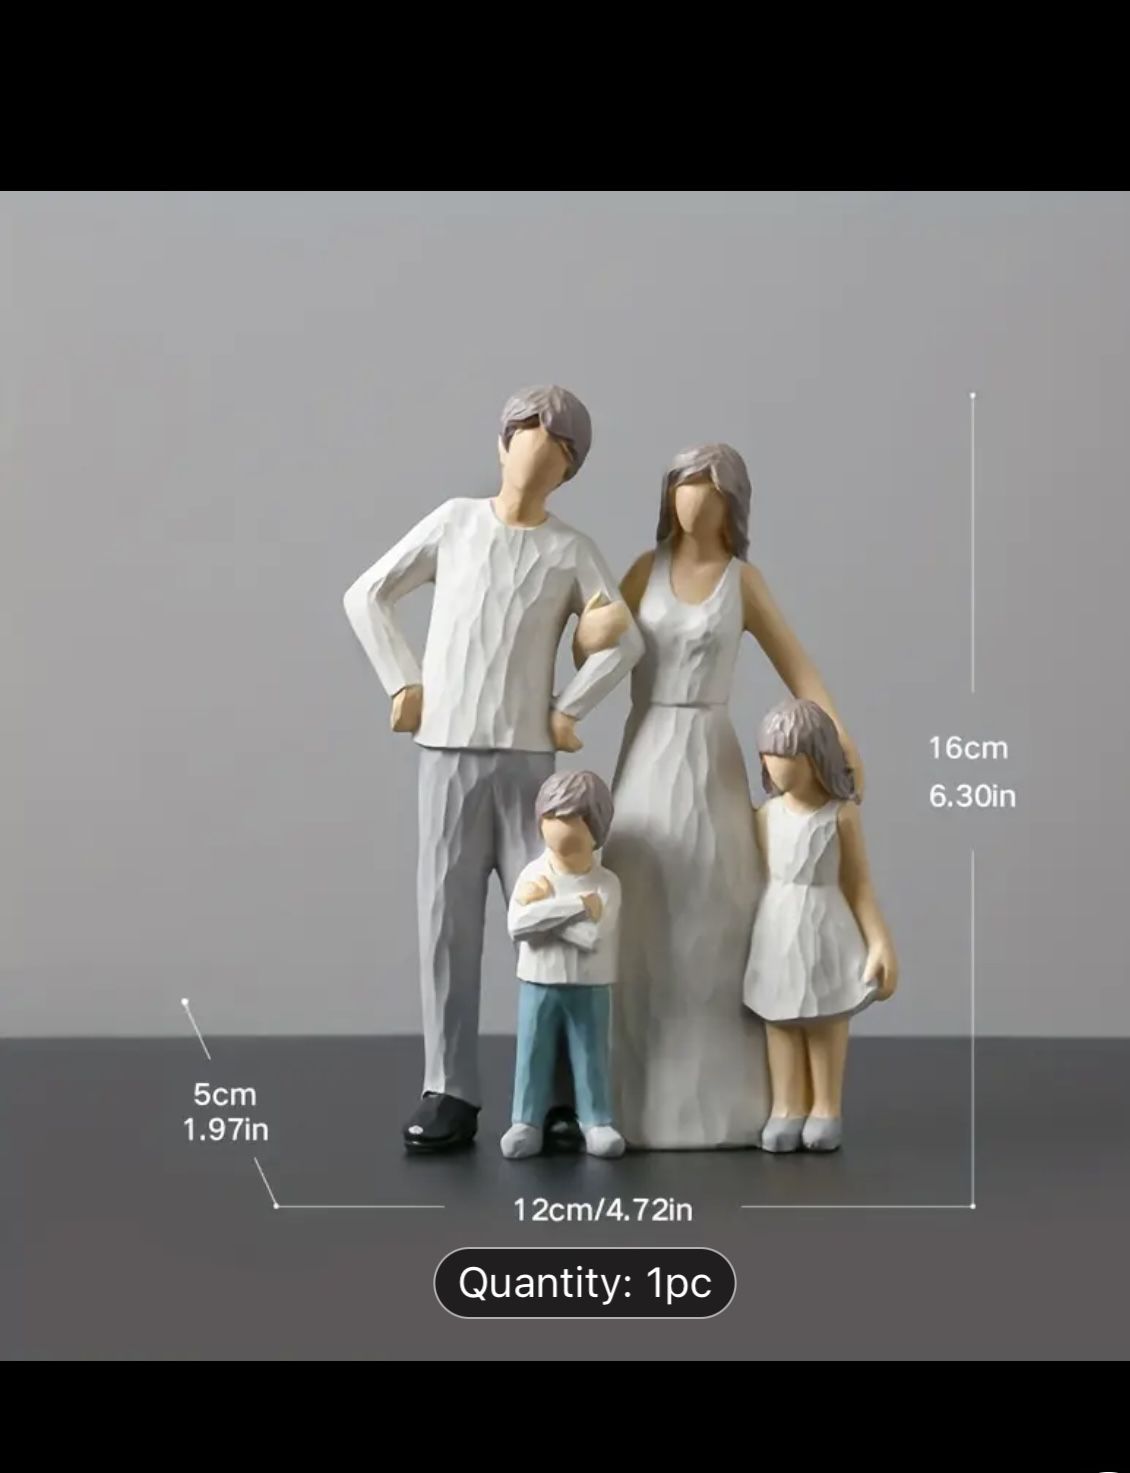 1pc, Family Figurines, Resin Ornament Sculpture